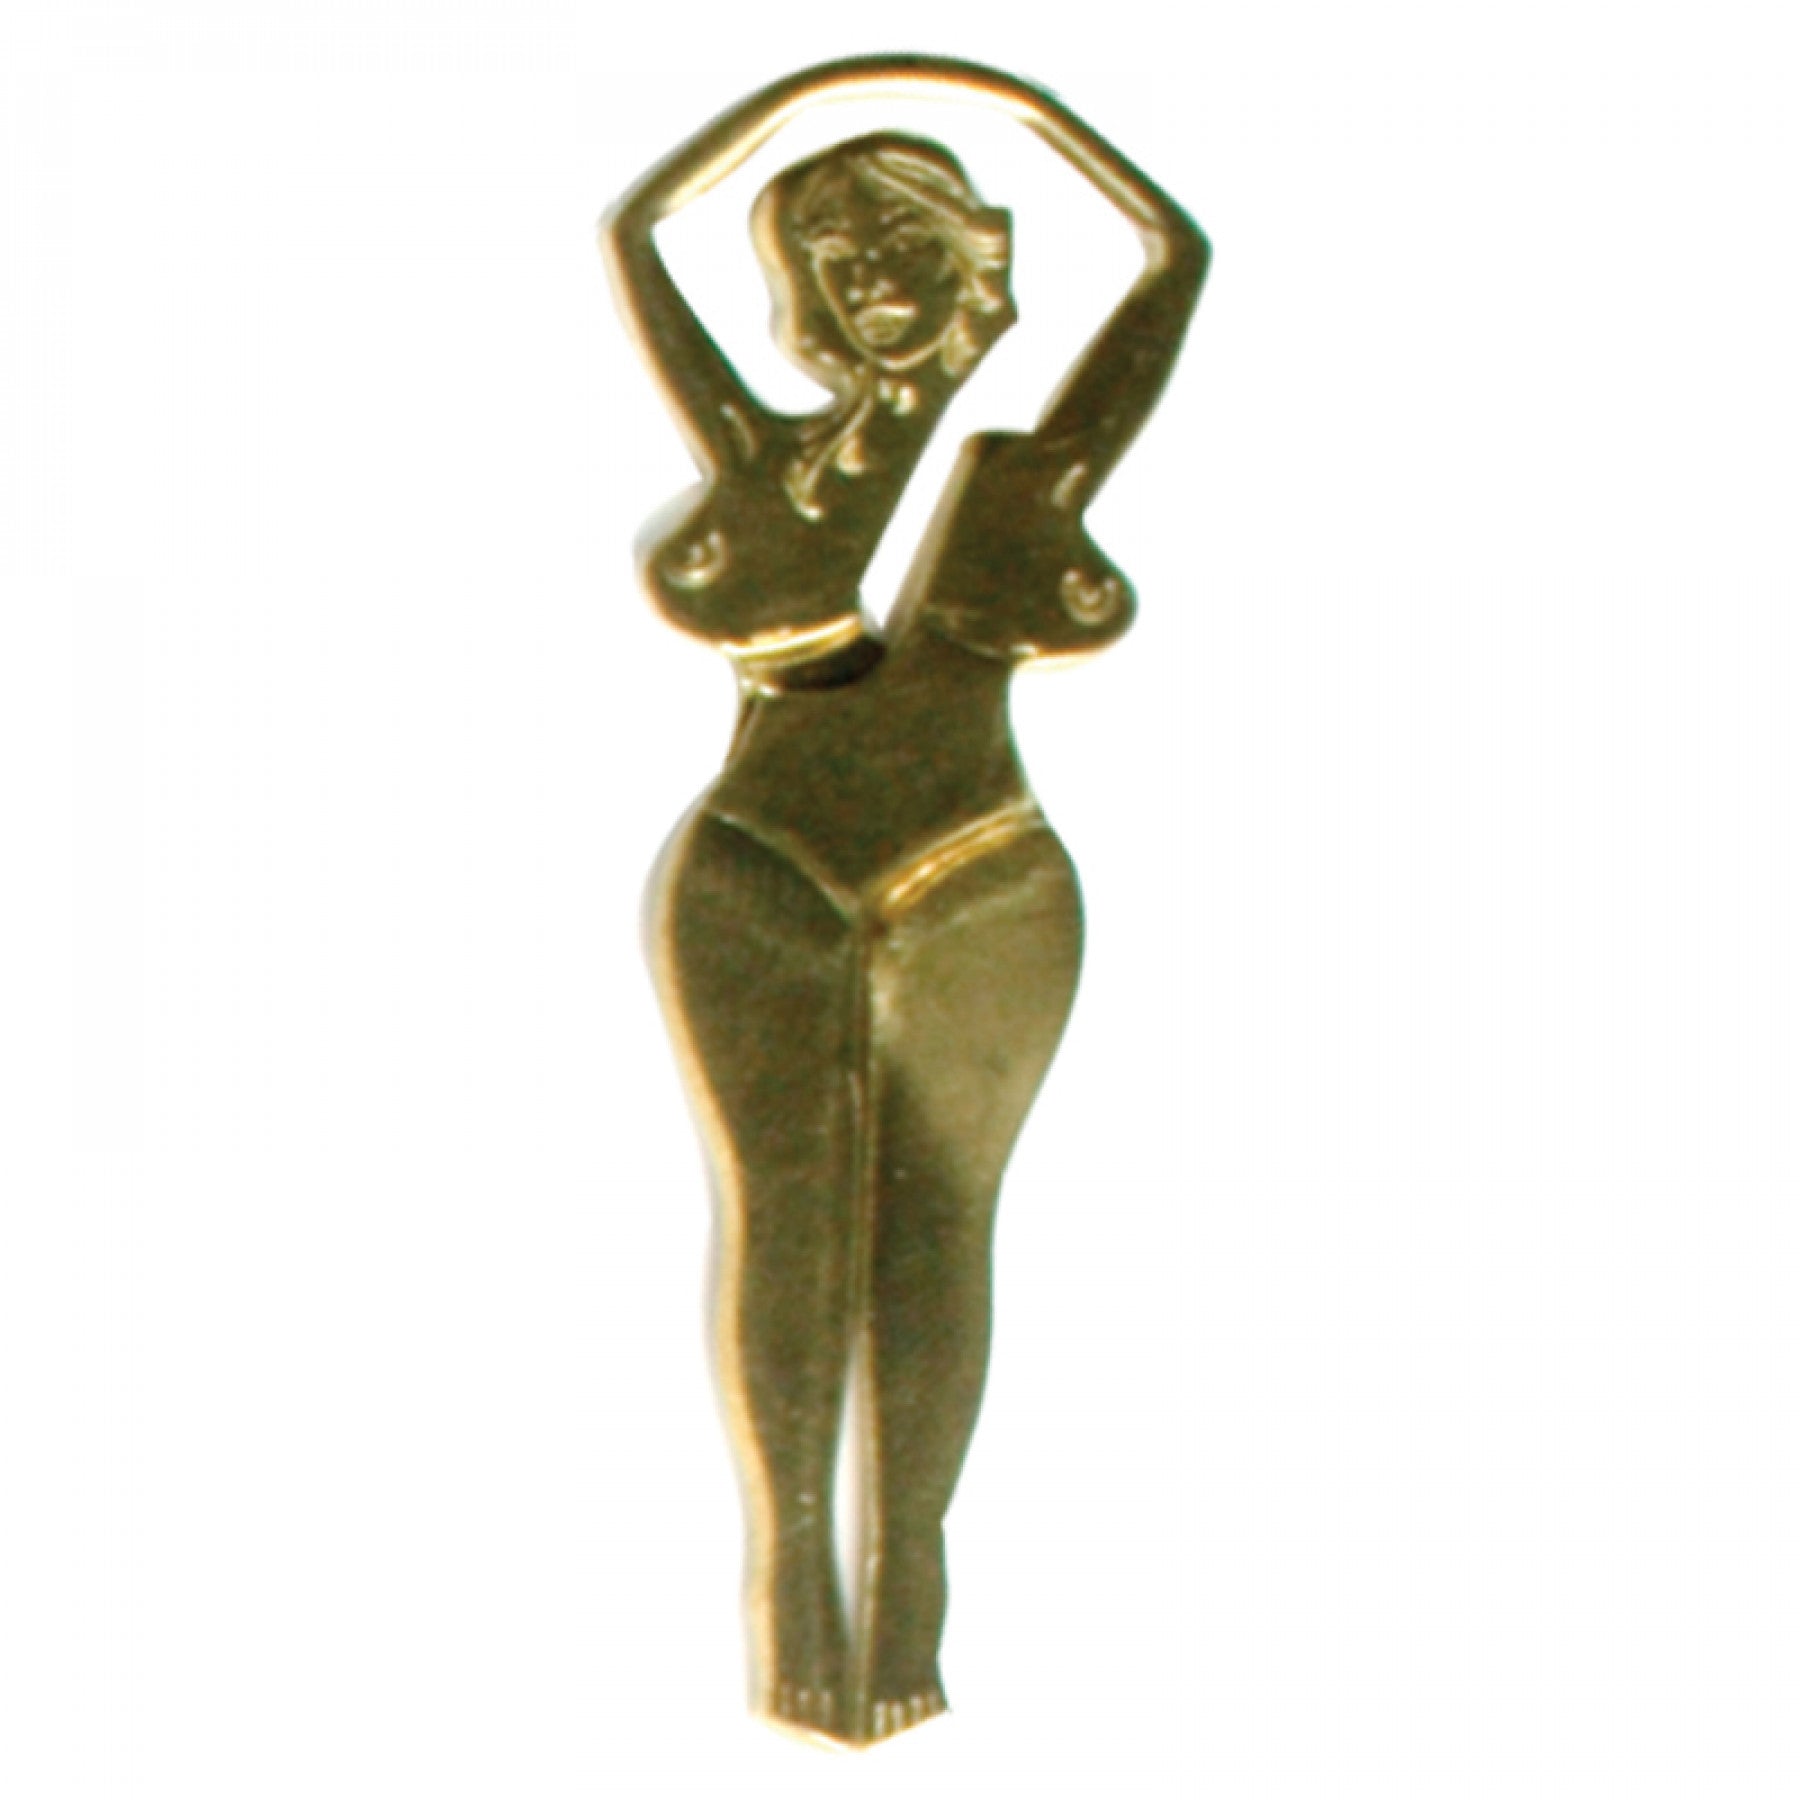 Brass roach clip in the shape of a woman